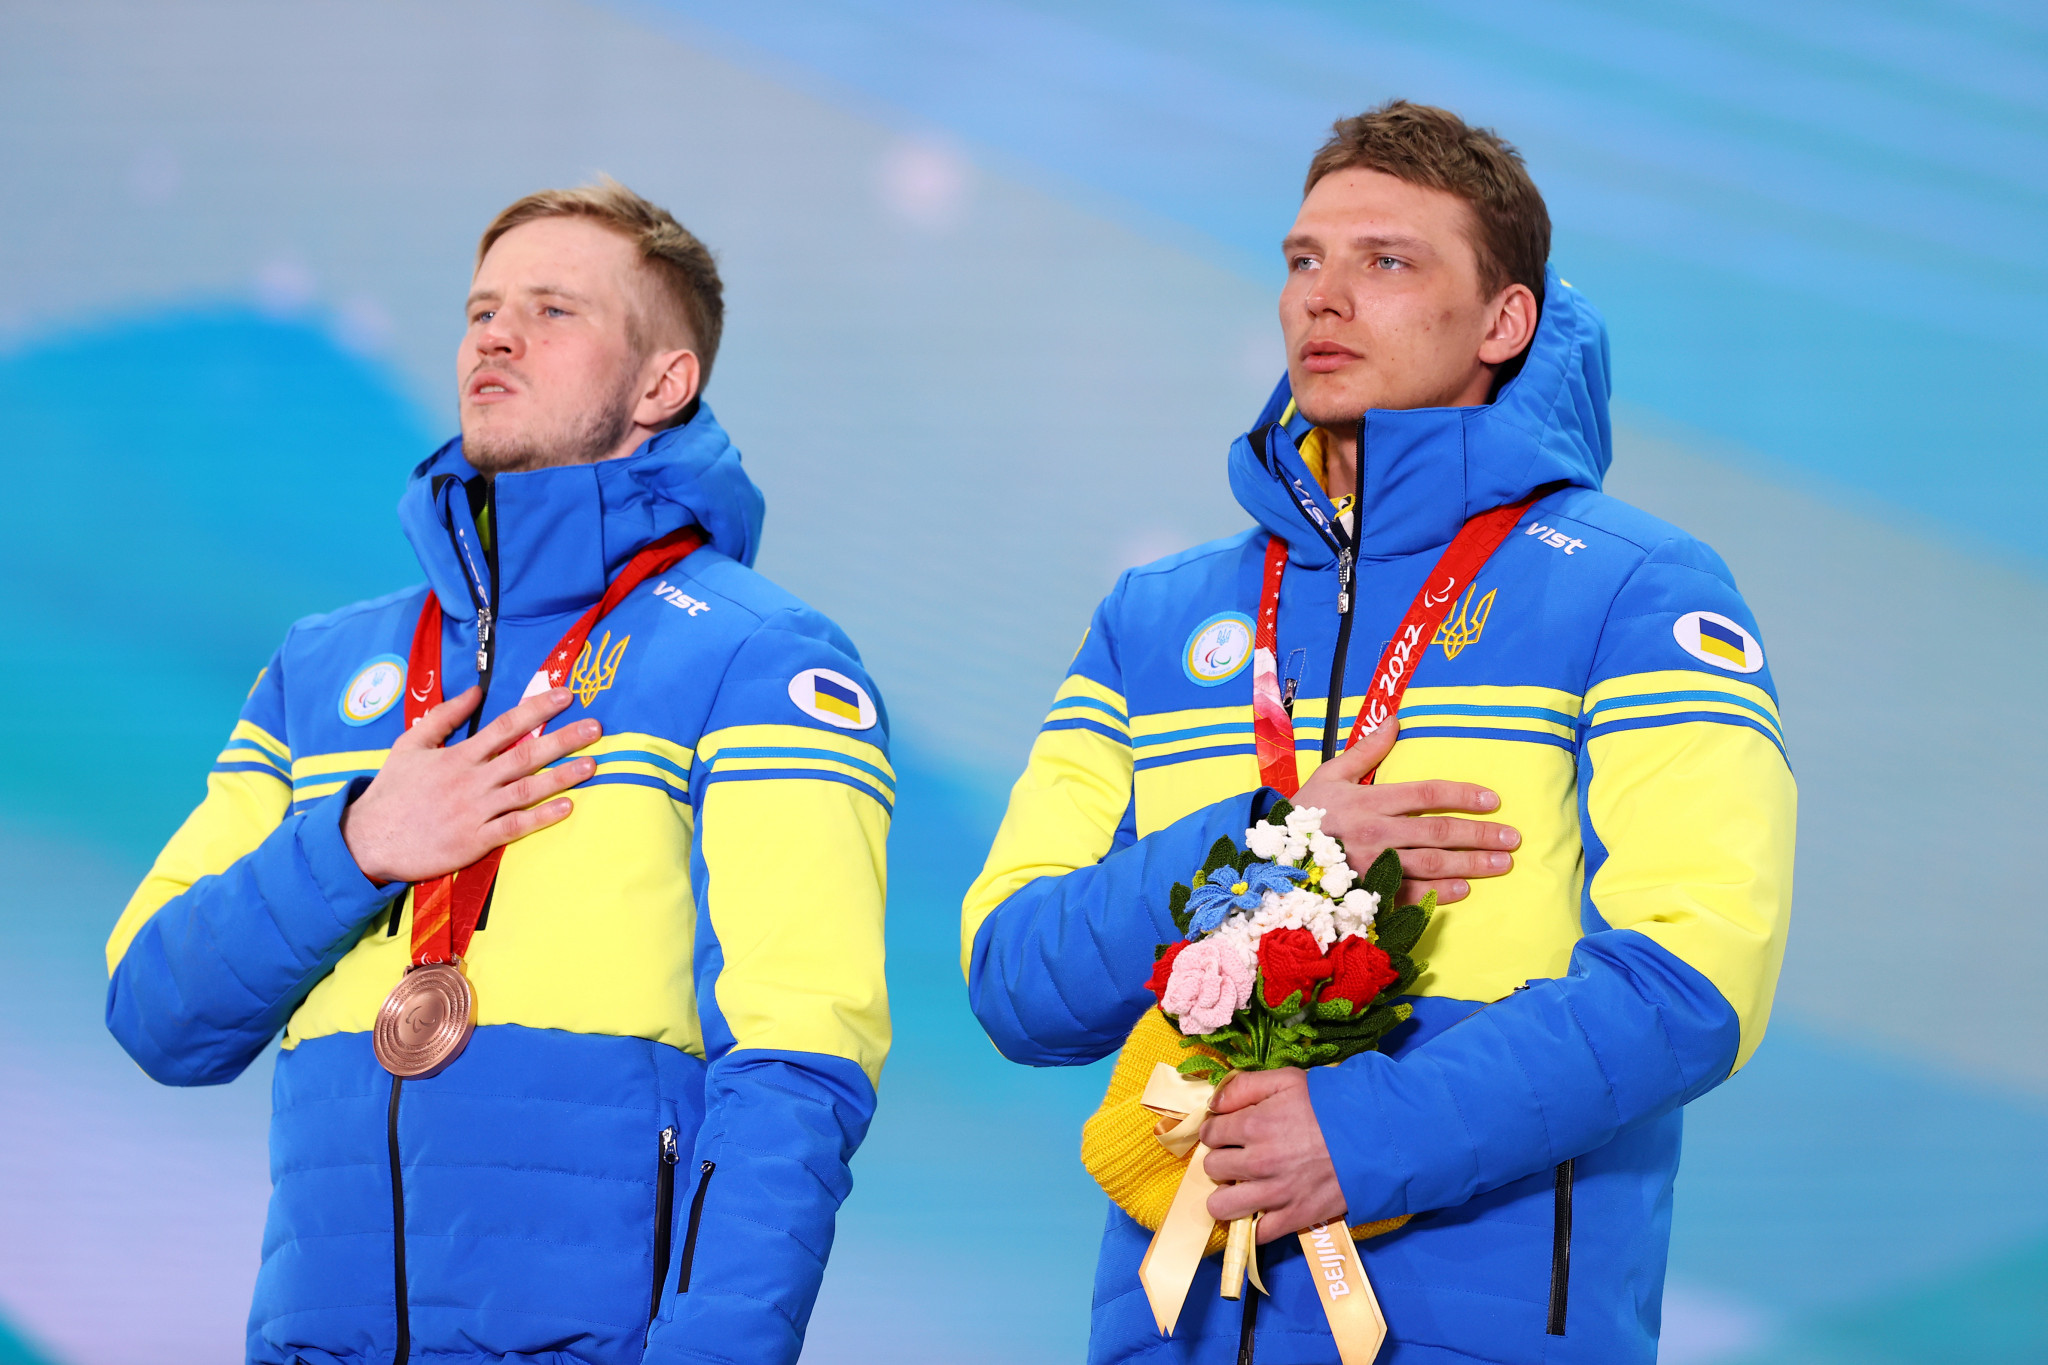 Dmytro Suiarko, left, and guide Oleksandr Nikonovych won bronze medals in the Para biathlon vision impaired men’s sprint ©Getty Images